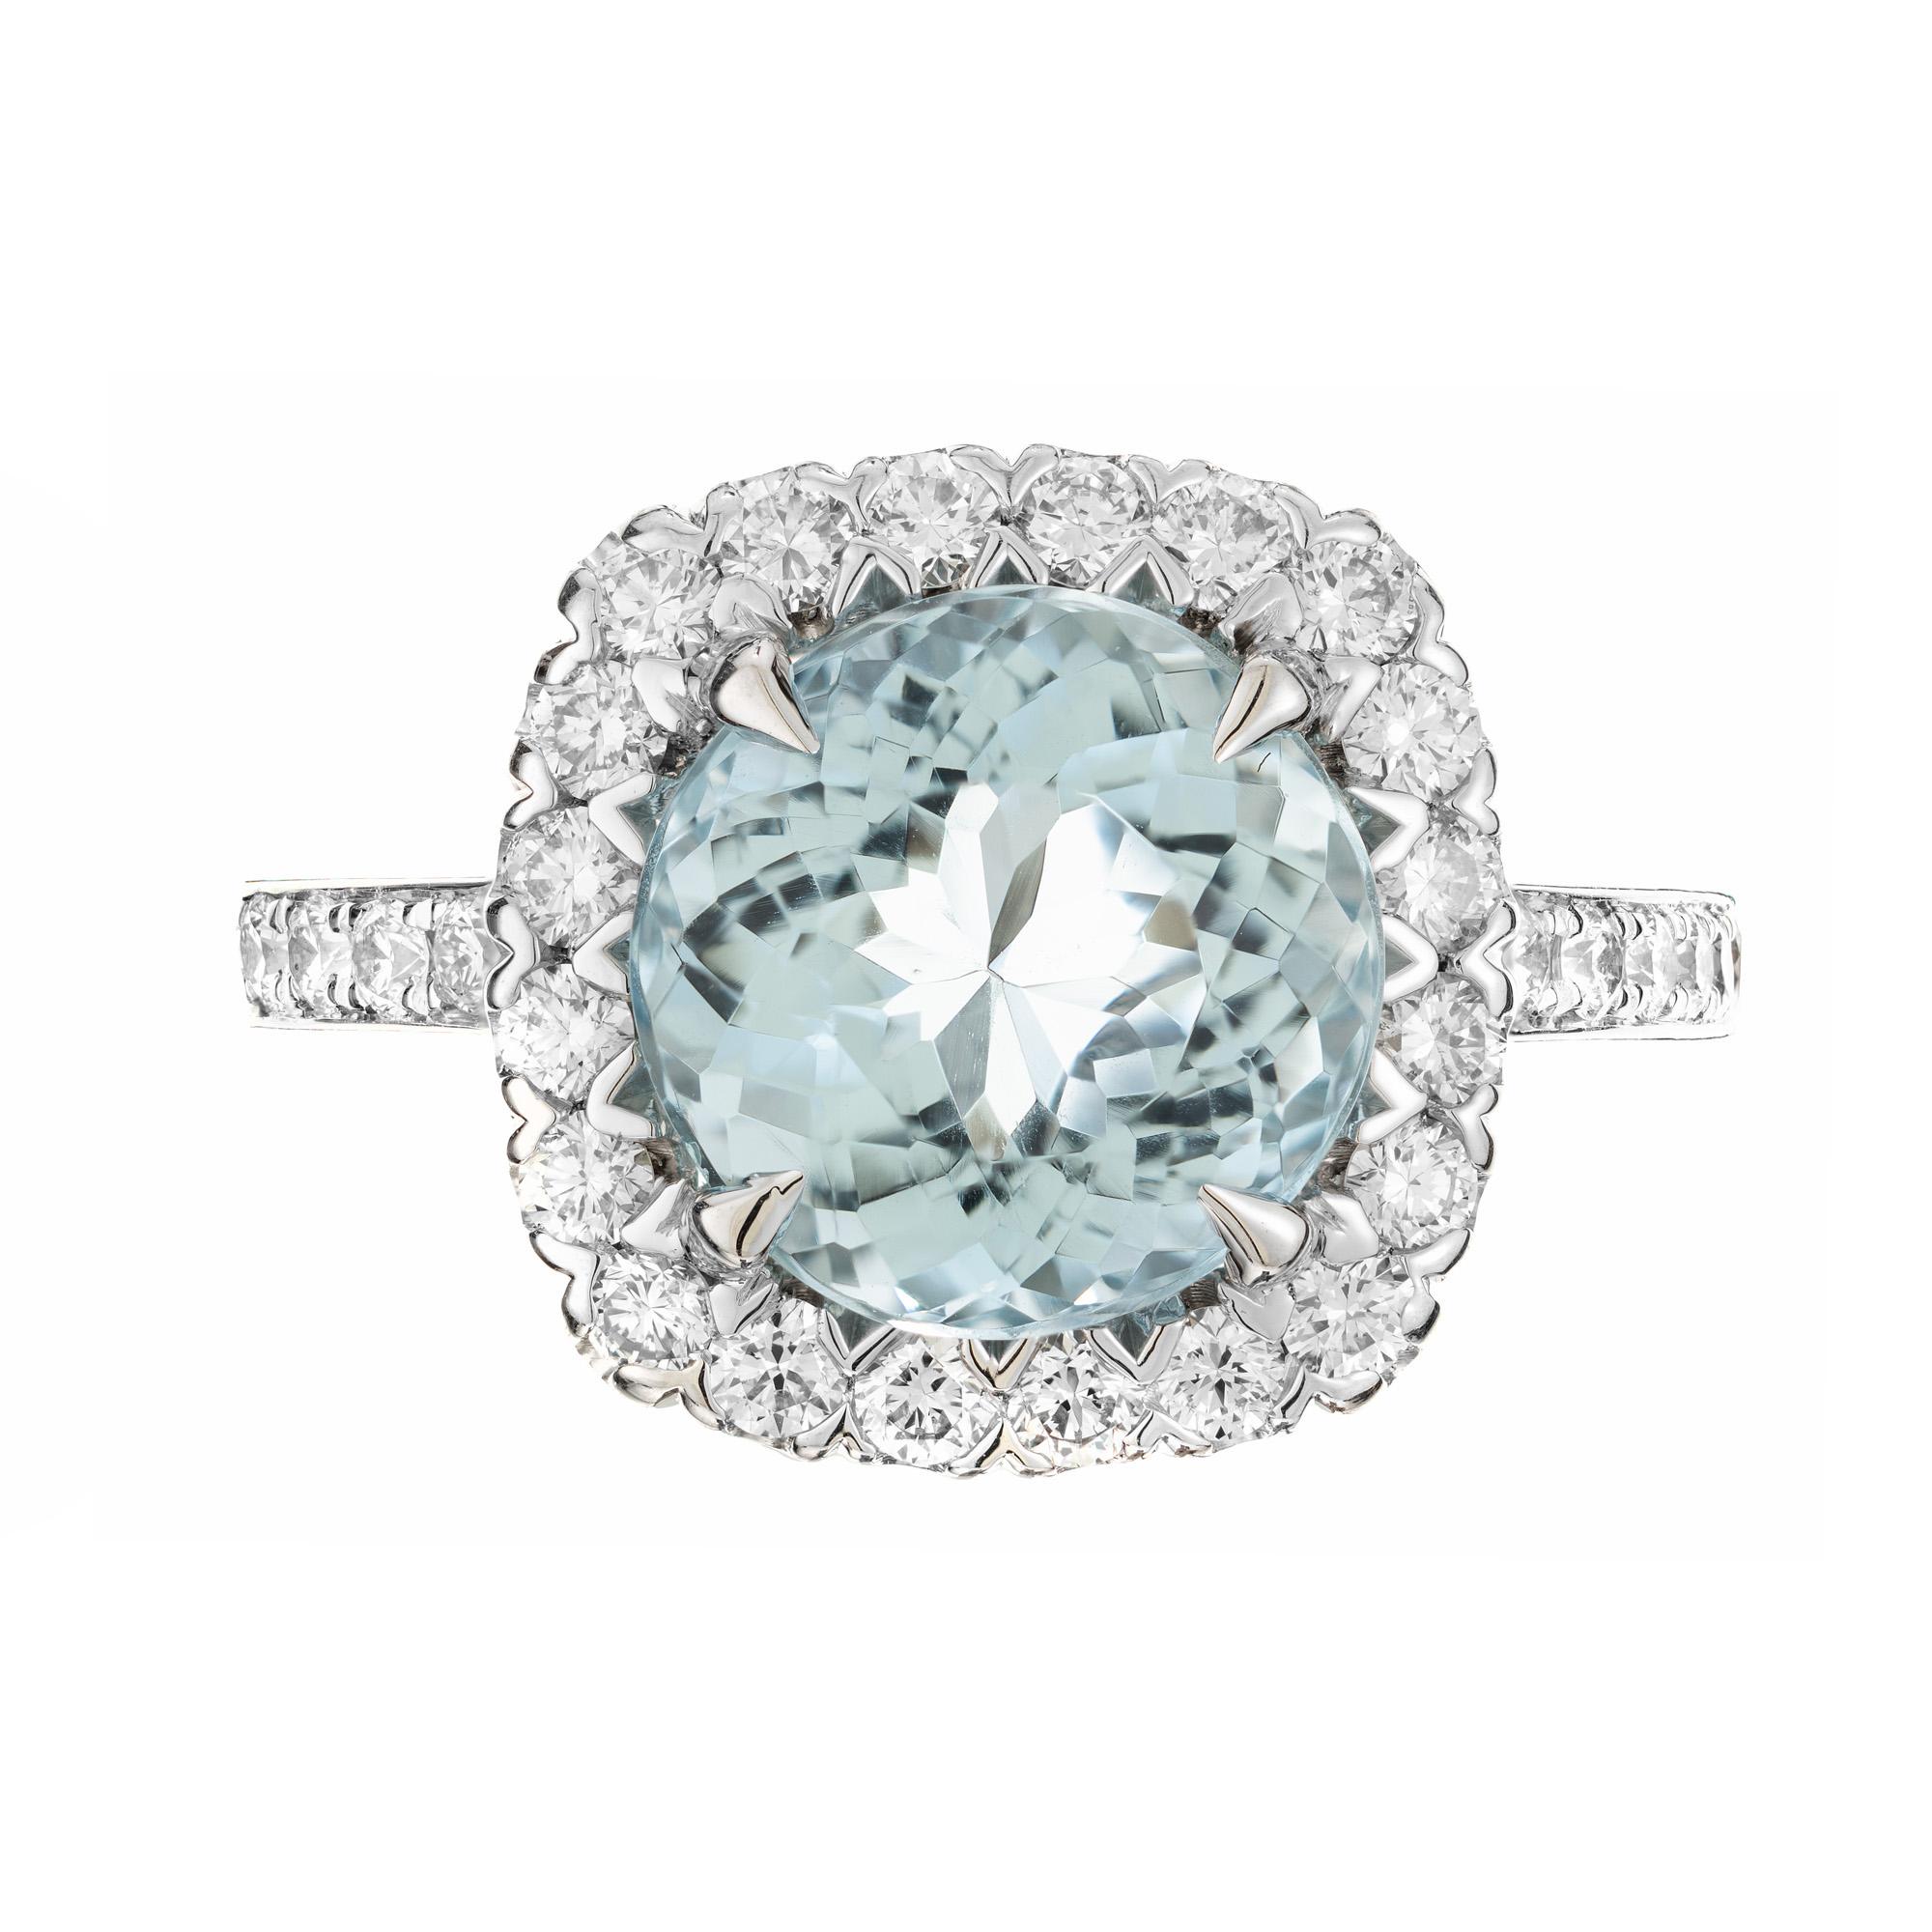 Bright, well cut Old European cut aqua from a 1910 estate. Natural, slightly greenish blue aqua in a secure and durable 
Aquamarine and Diamond halo platinum engagement ring. This beautiful ring begins with a round 3.66ct center aquamarine that is